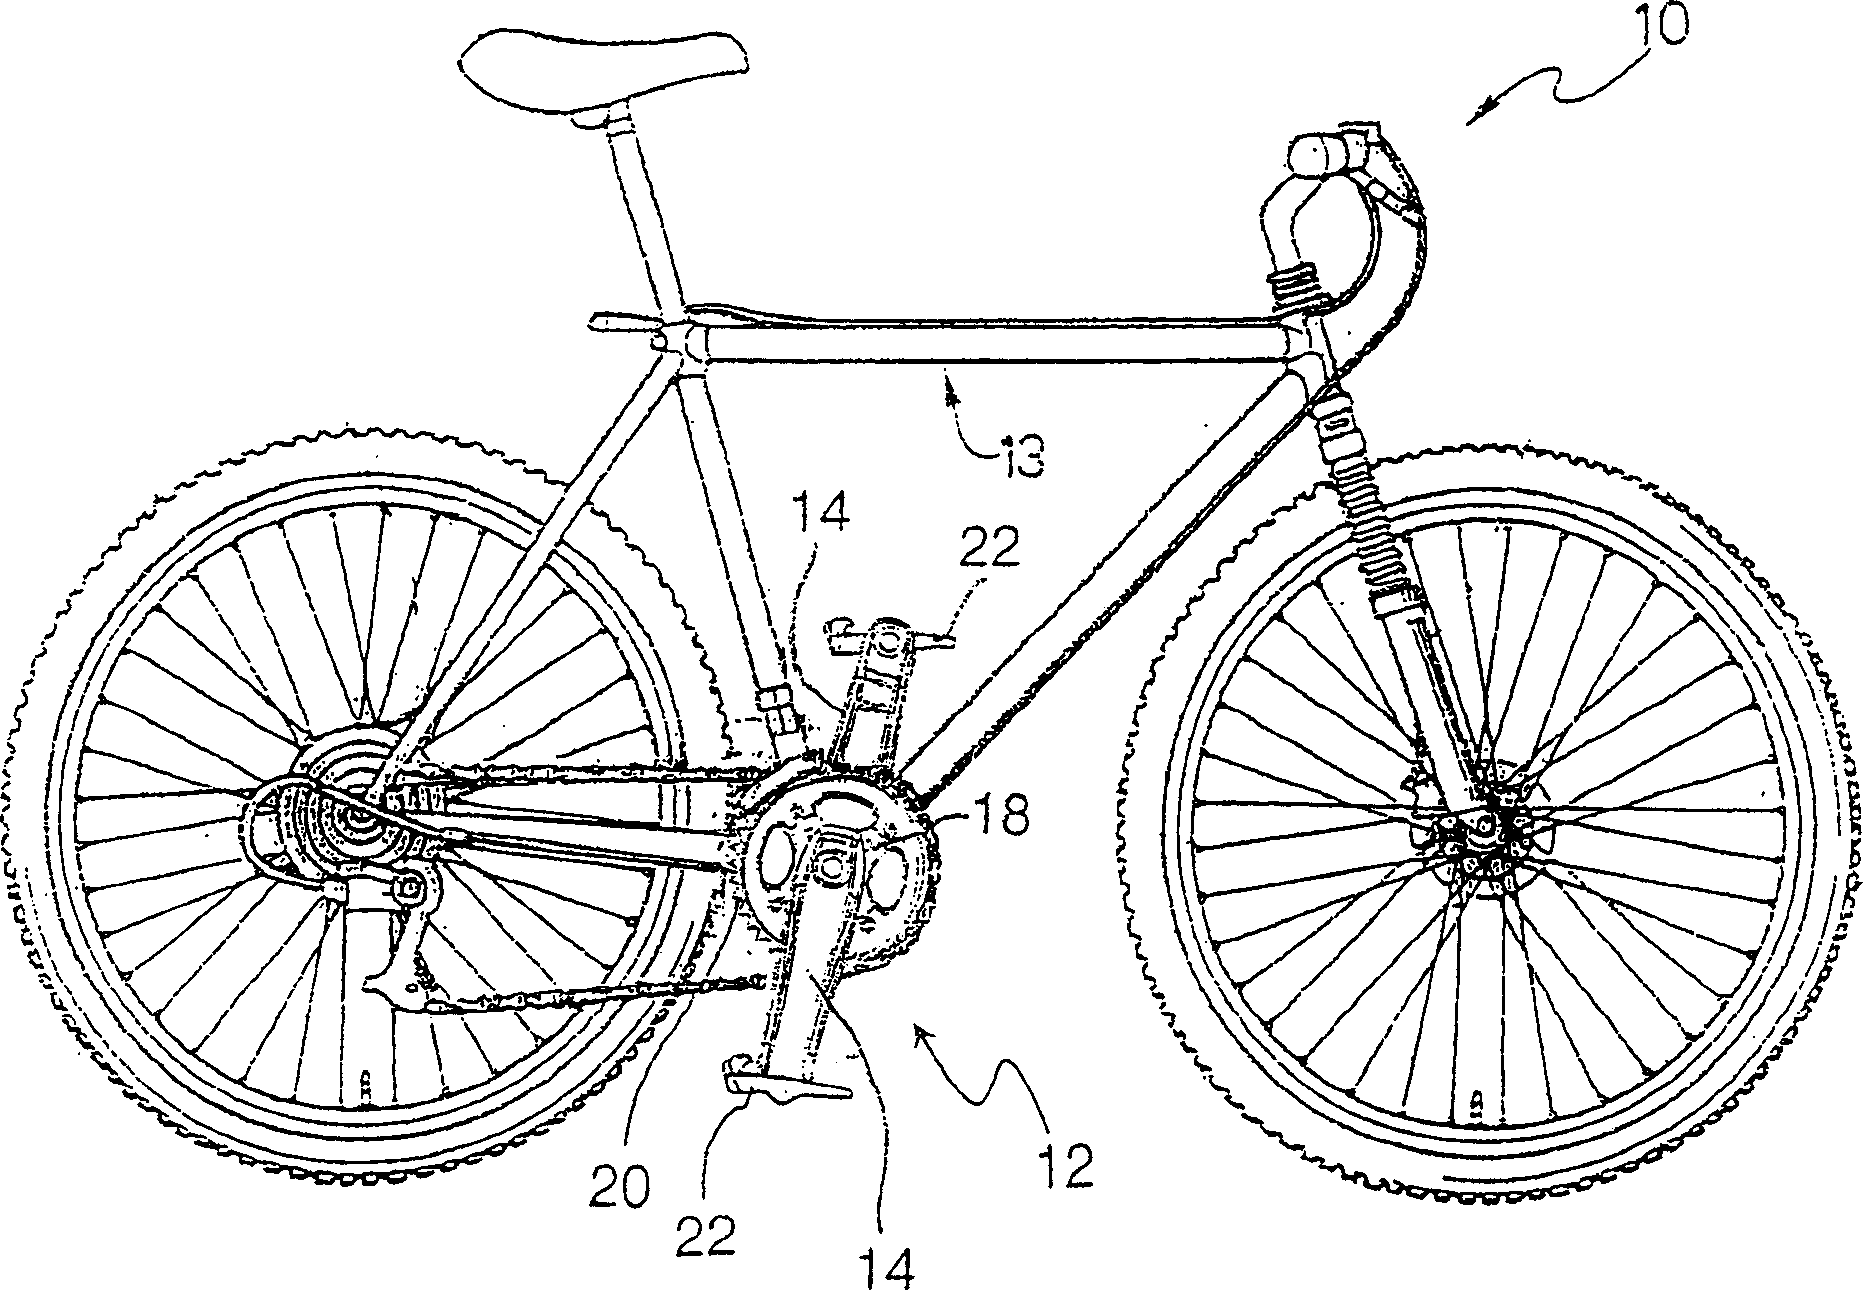 Crank web assembly of bicycle